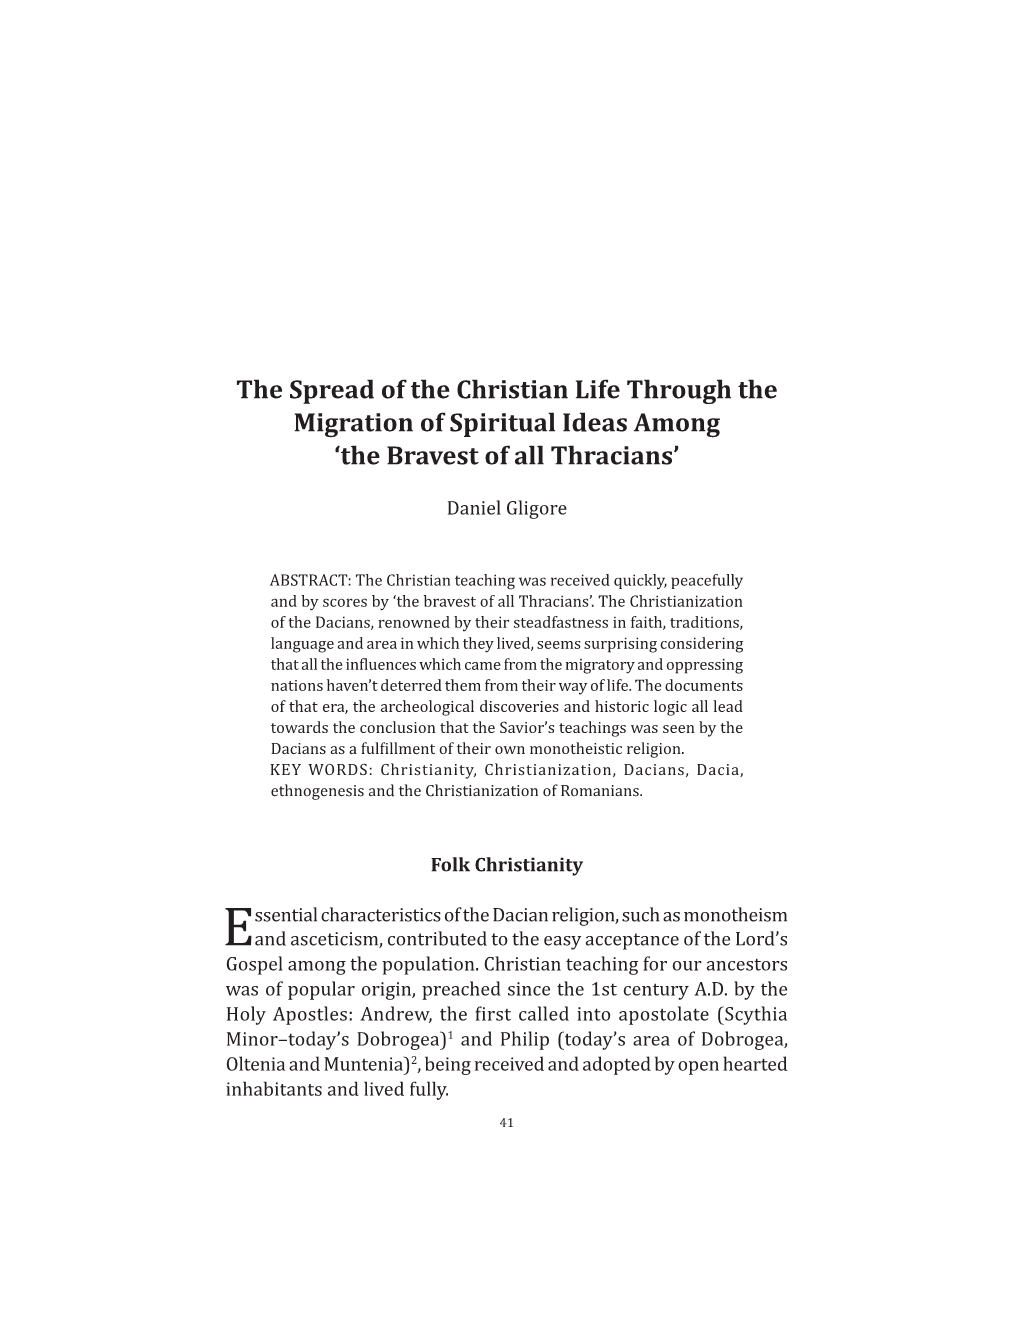 The Spread of the Christian Life Through the Migration of Spiritual Ideas Among 'The Bravest of All Thracians'